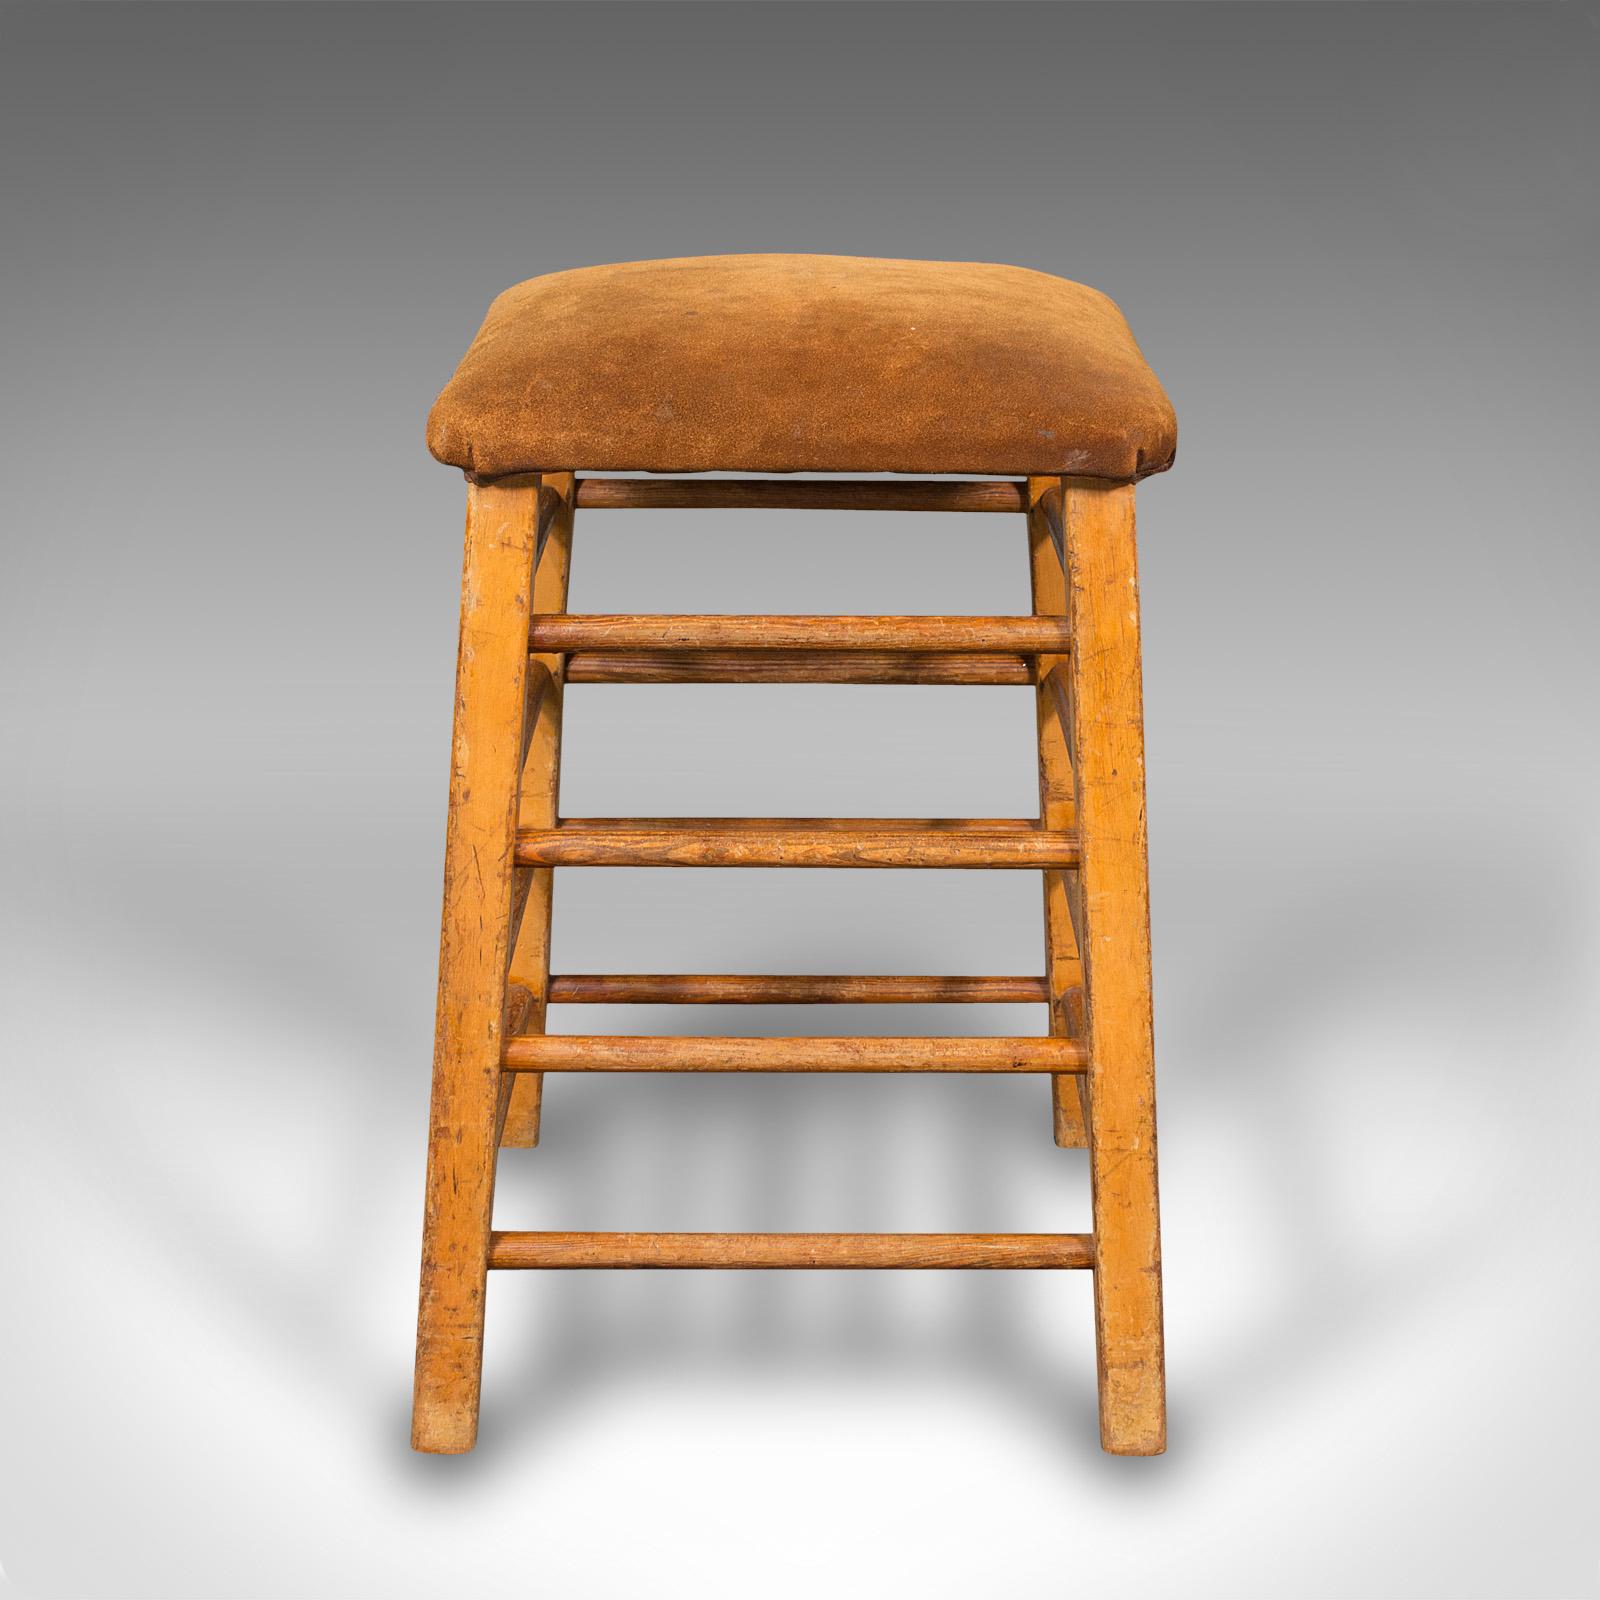 20th Century Large Vintage Artist's Stool, English, Pitch Pine, Suede, Gym, Lab Seat, C.1960 For Sale